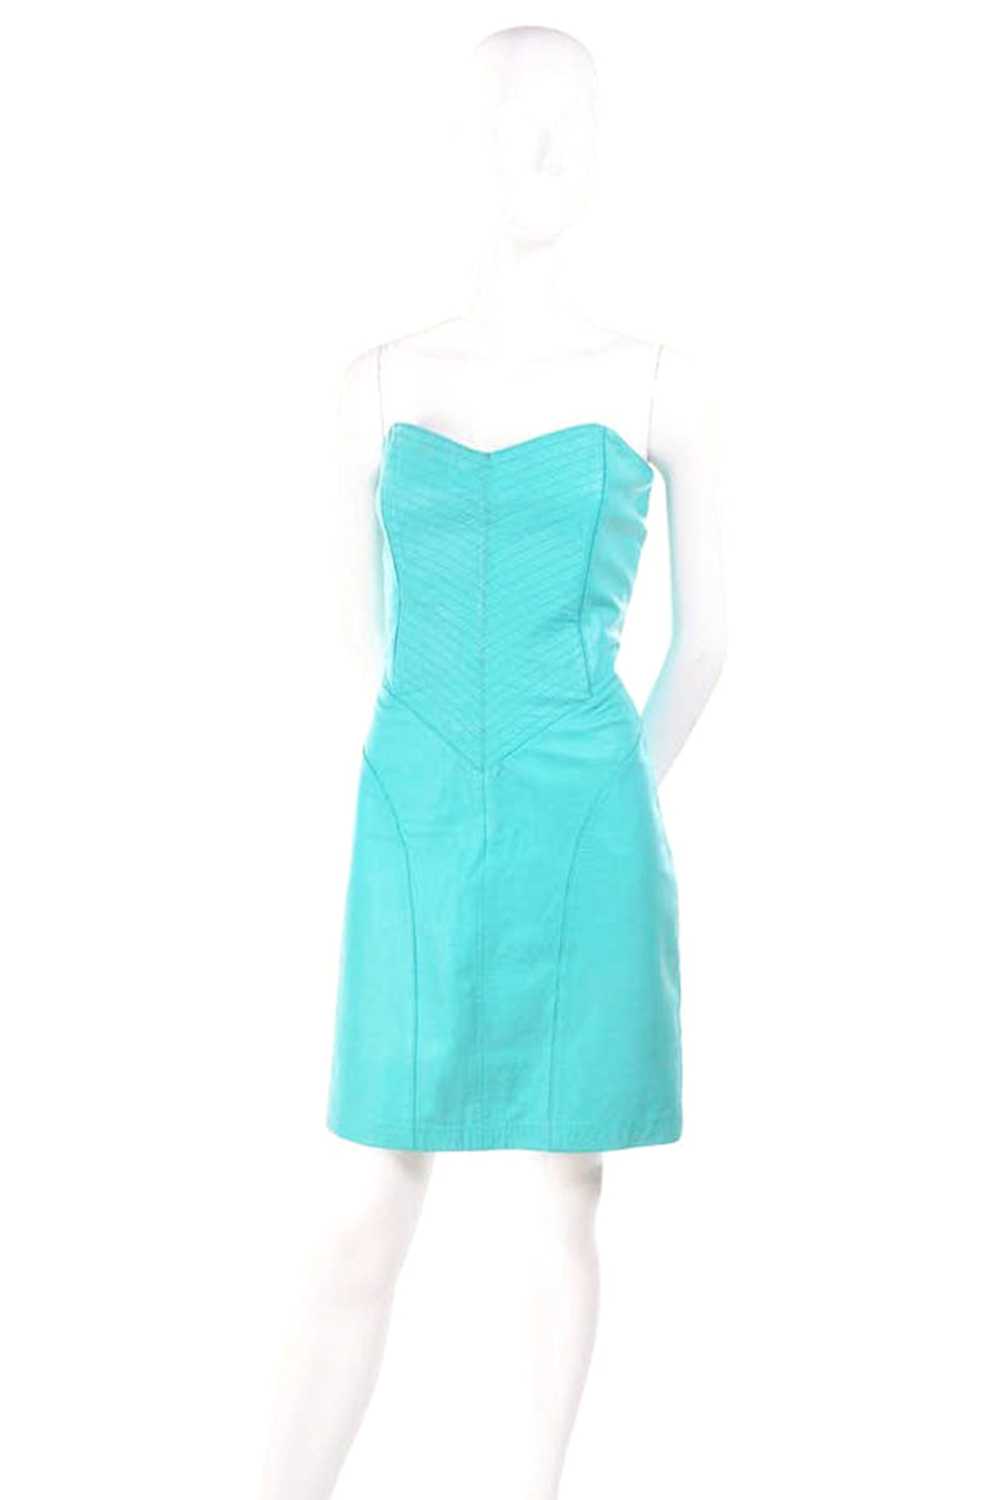 1980s Turquoise Leather Strapless Dress 4/6 - image 2